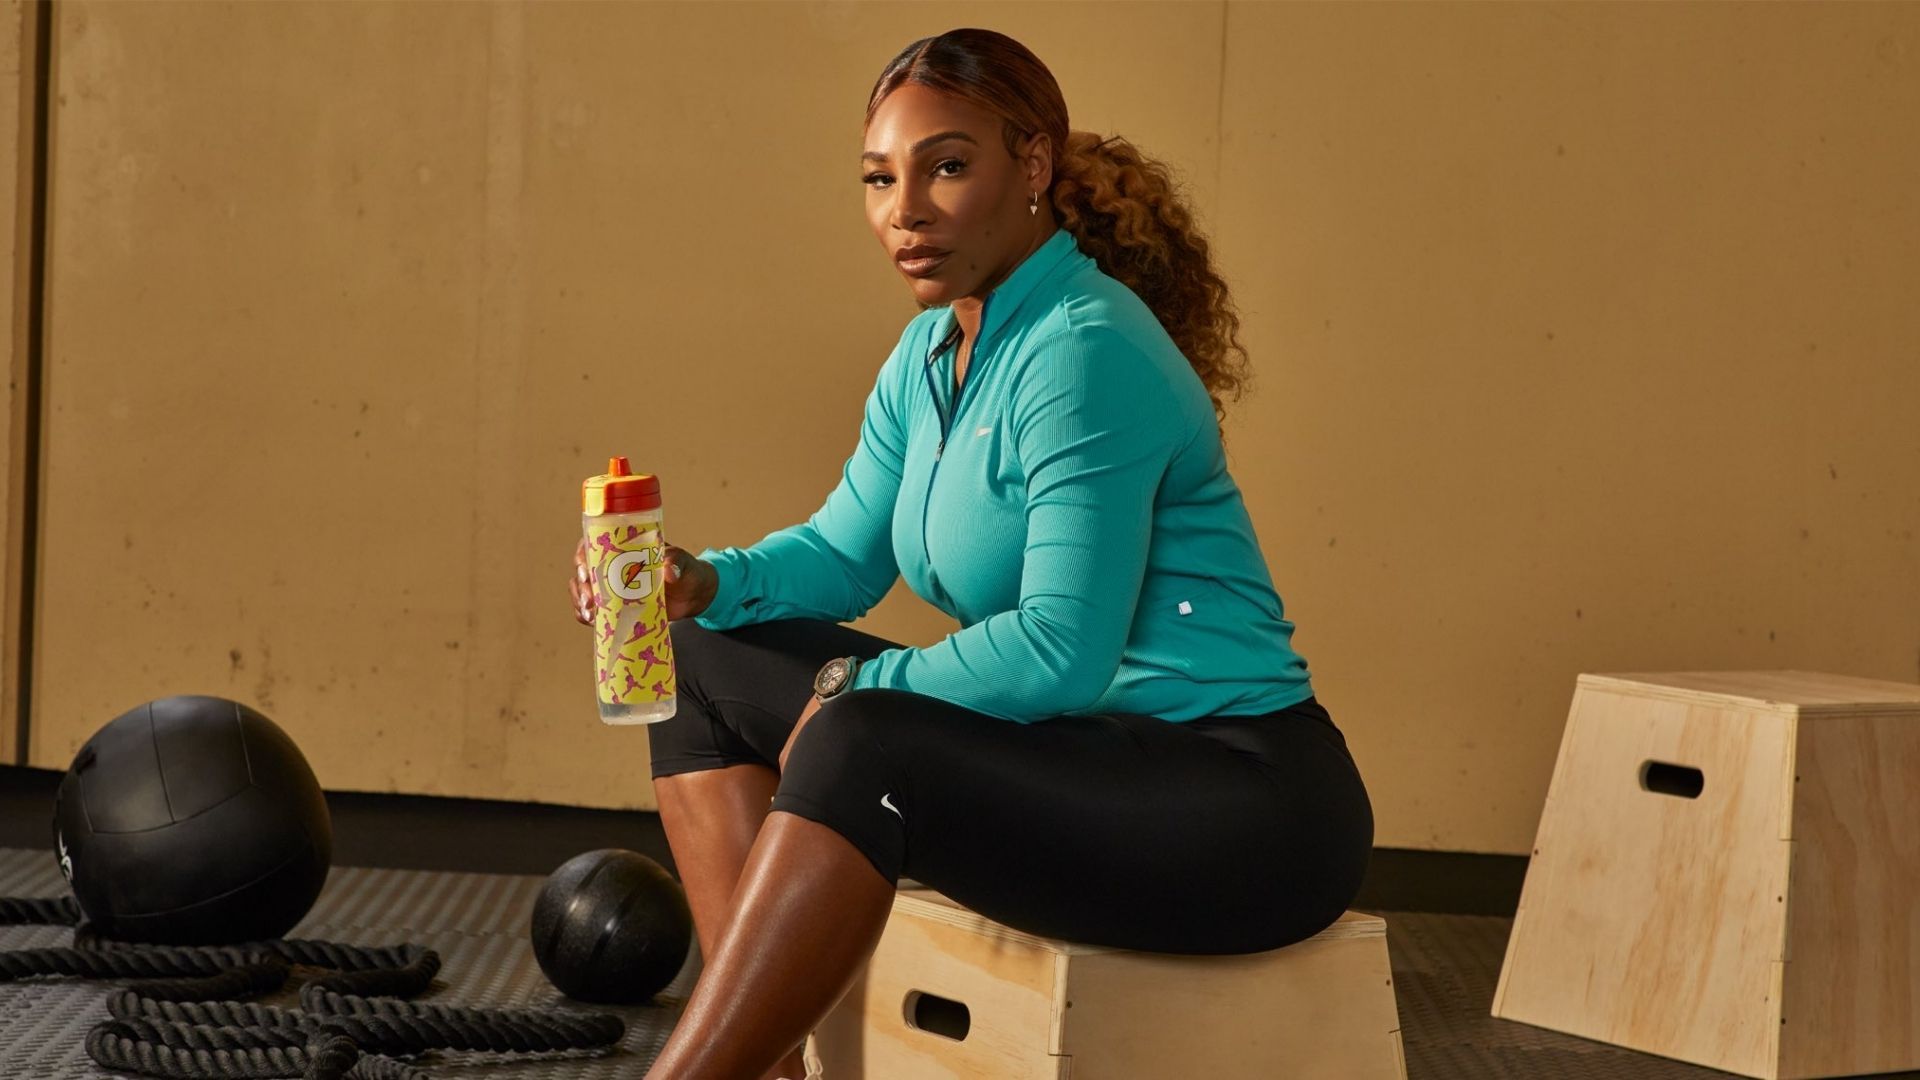 Mothers who rule the world: Serena Williams